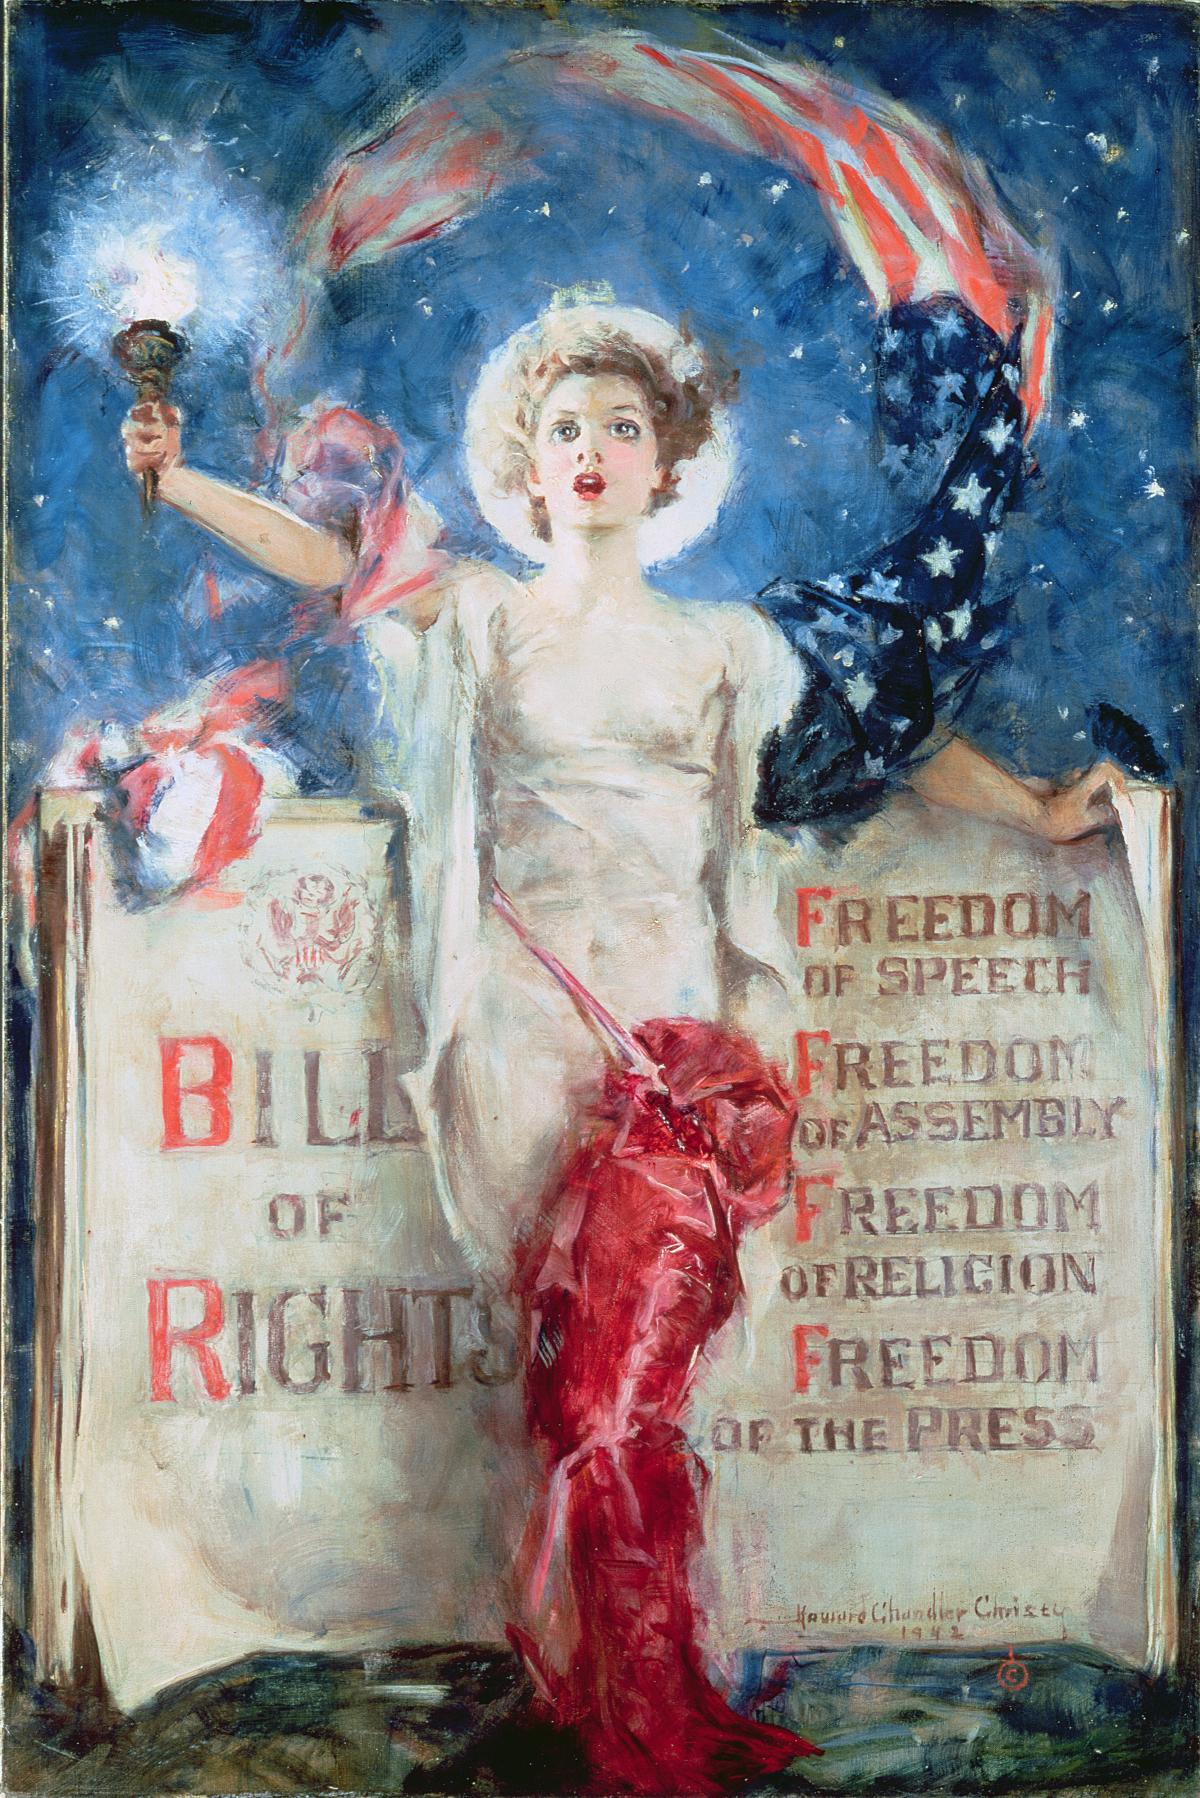 Woman looking upward, holding a torch in right hand, surrounded by a starry night sky, the american flag, and text from the Bill of Rights